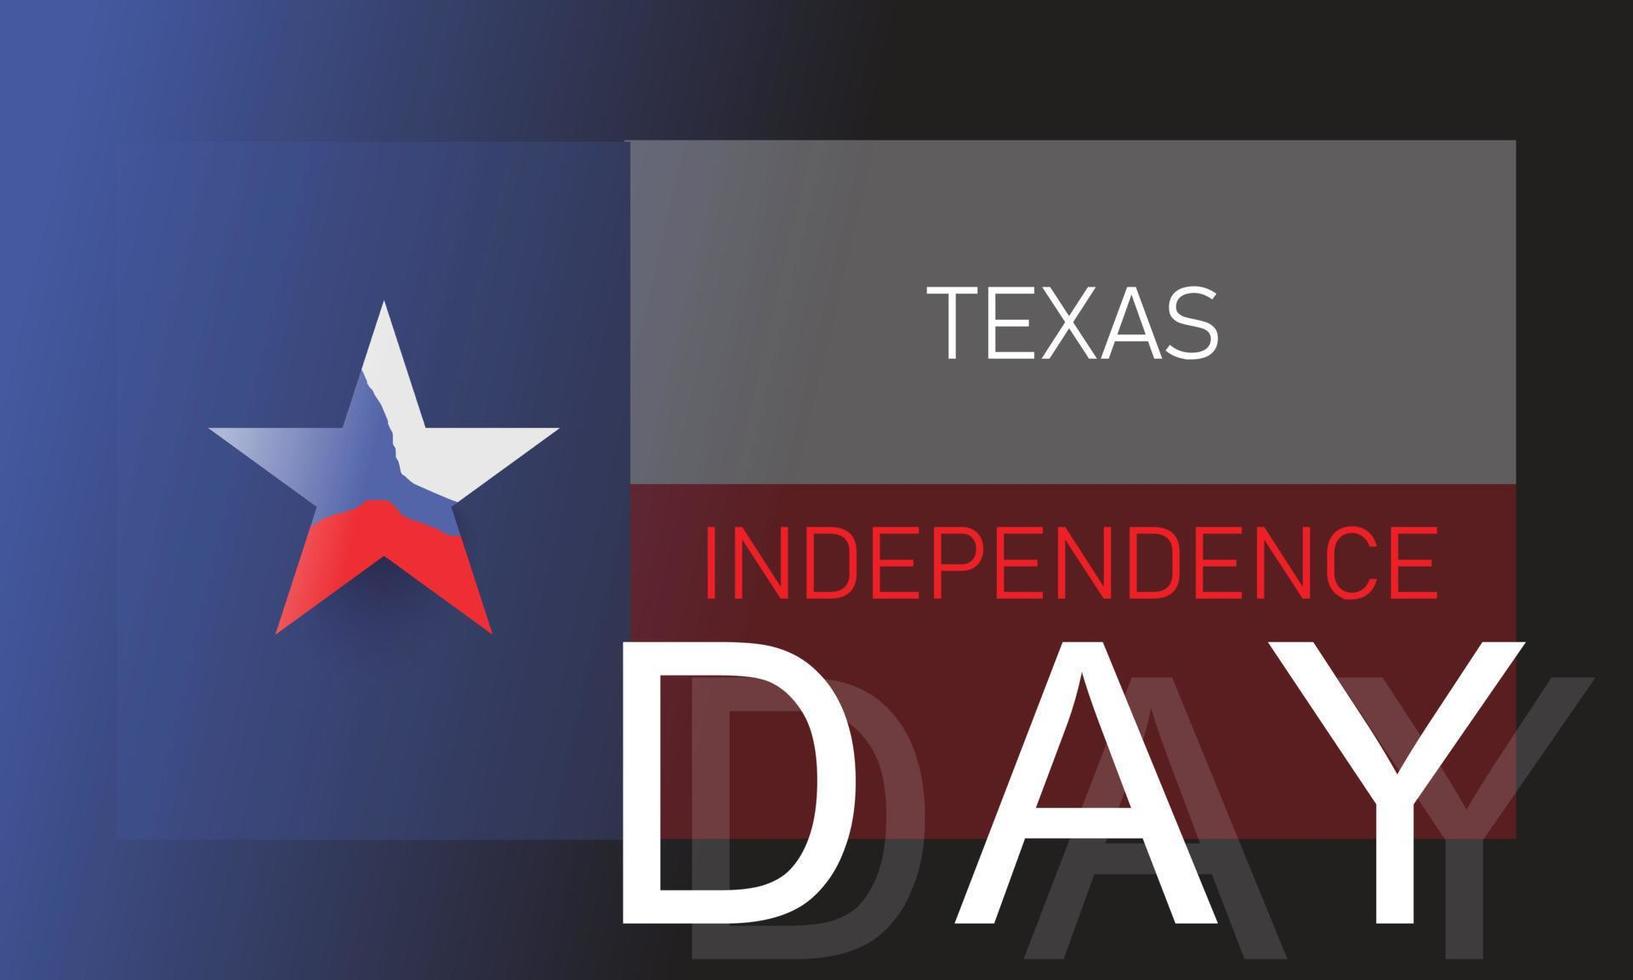 Texas Independence Day Background. Banner, Poster, Vector Illustration.